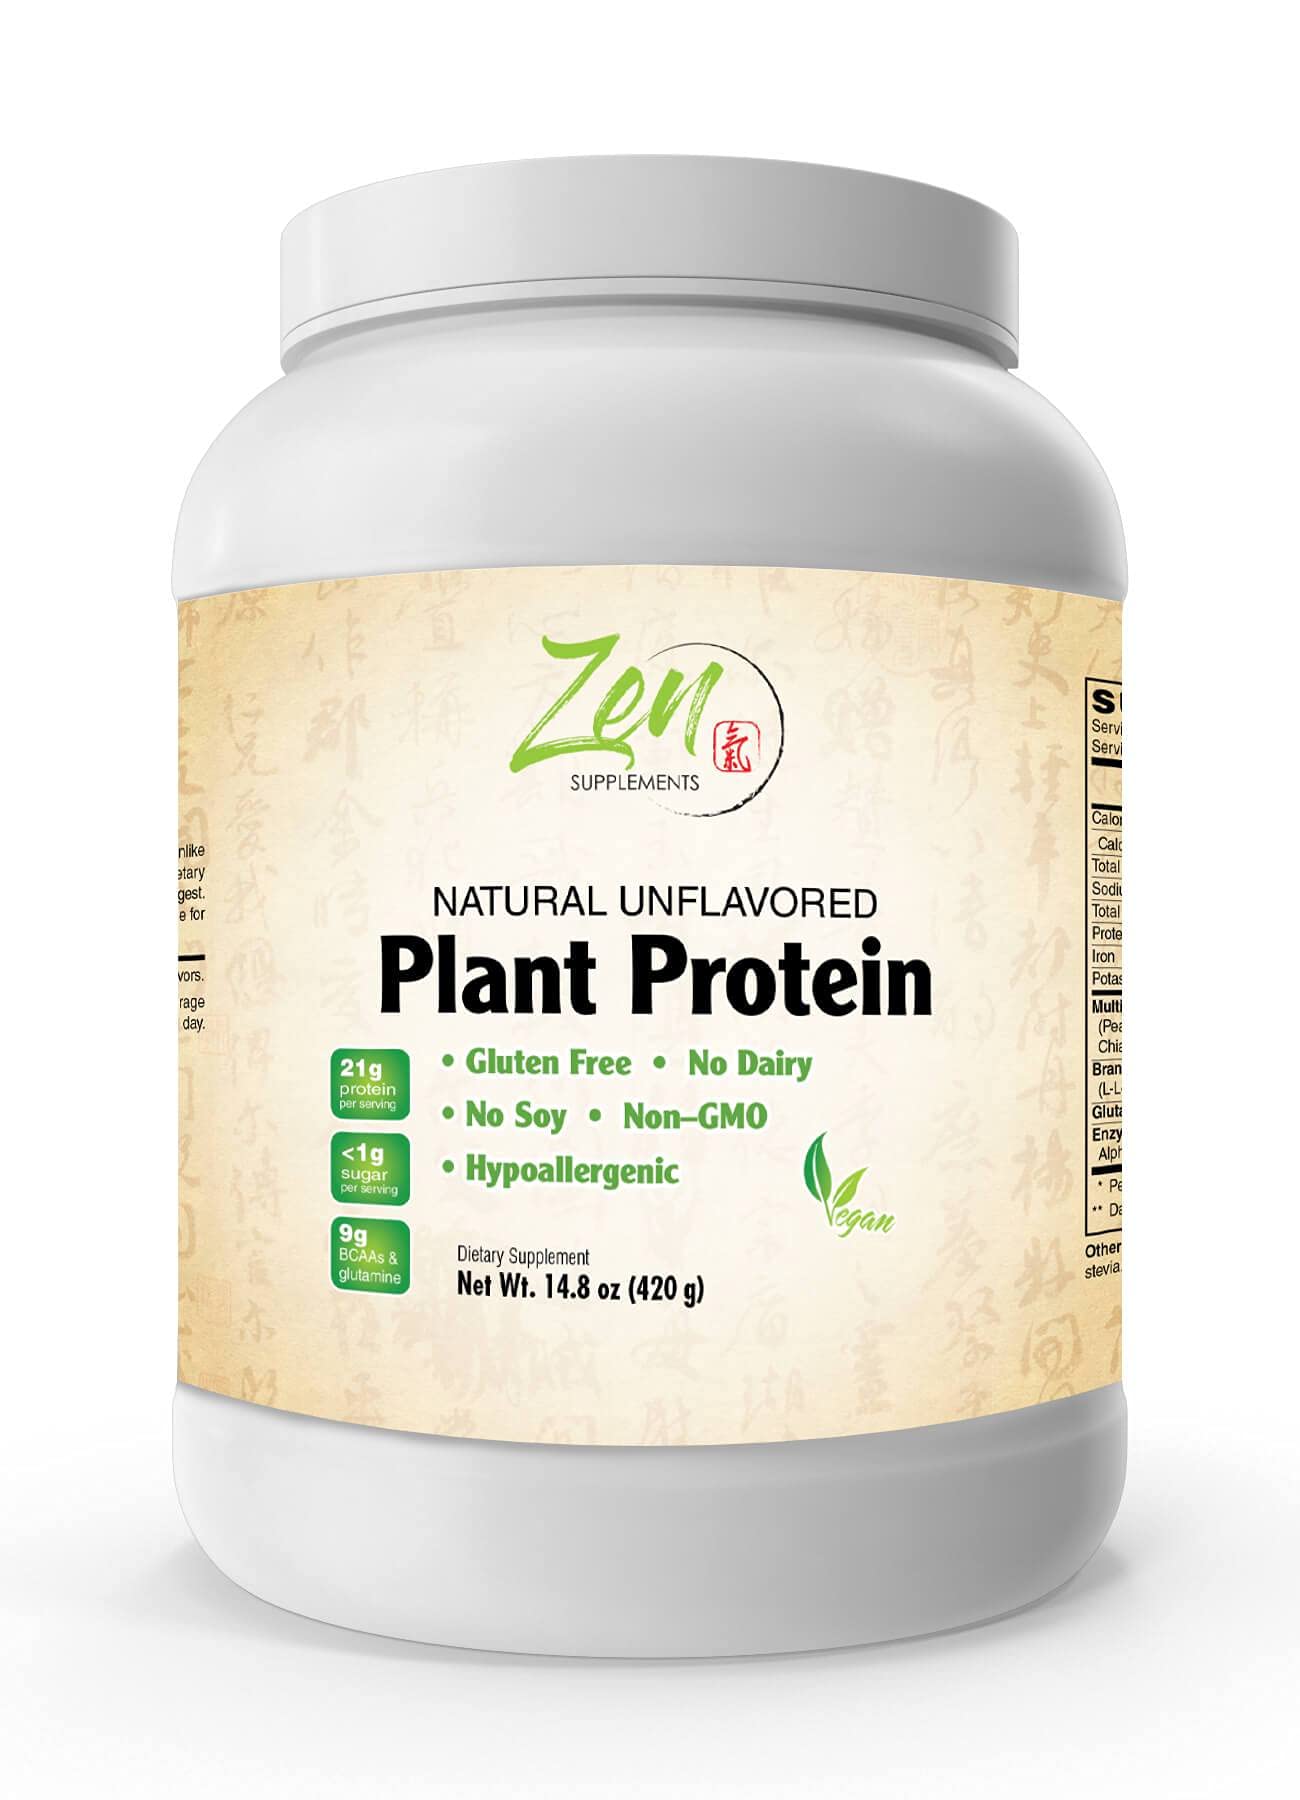 Zen Supplements - Plant Protein - Vegan/Natural Unflavored 14.8 Oz-Powder - 24.5 Grams of Protein Per Serving -Vegan, Low Net Carbs, Non Dairy, Gluten Free, Lactose Free, No Sugar Added, Soy Free, Kosher, Non-GMO